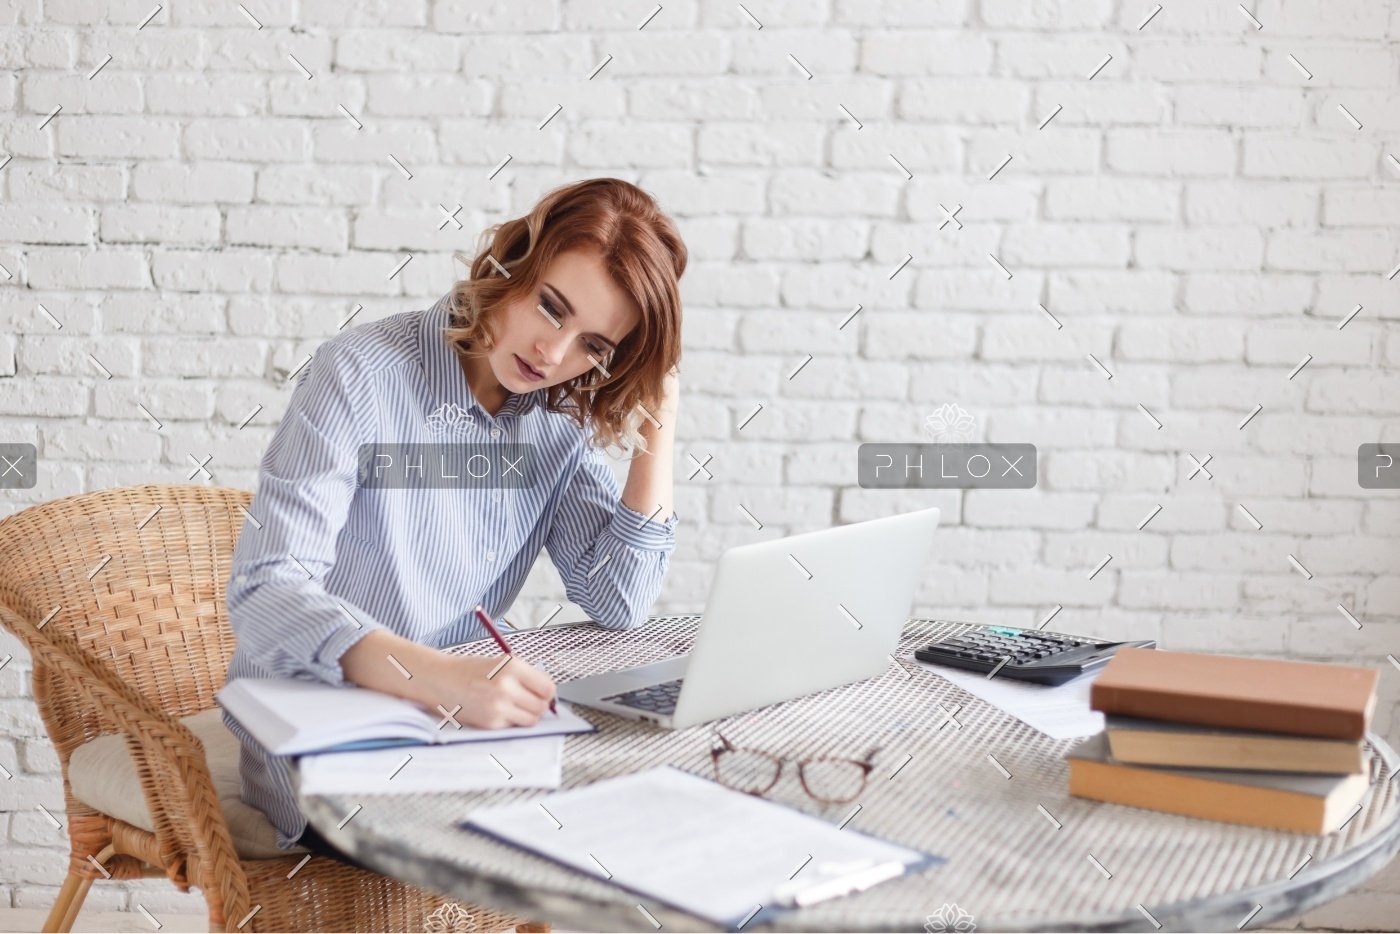 demo-attachment-1157-woman-freelancer-female-hands-with-pen-writing-on-P369BAX1